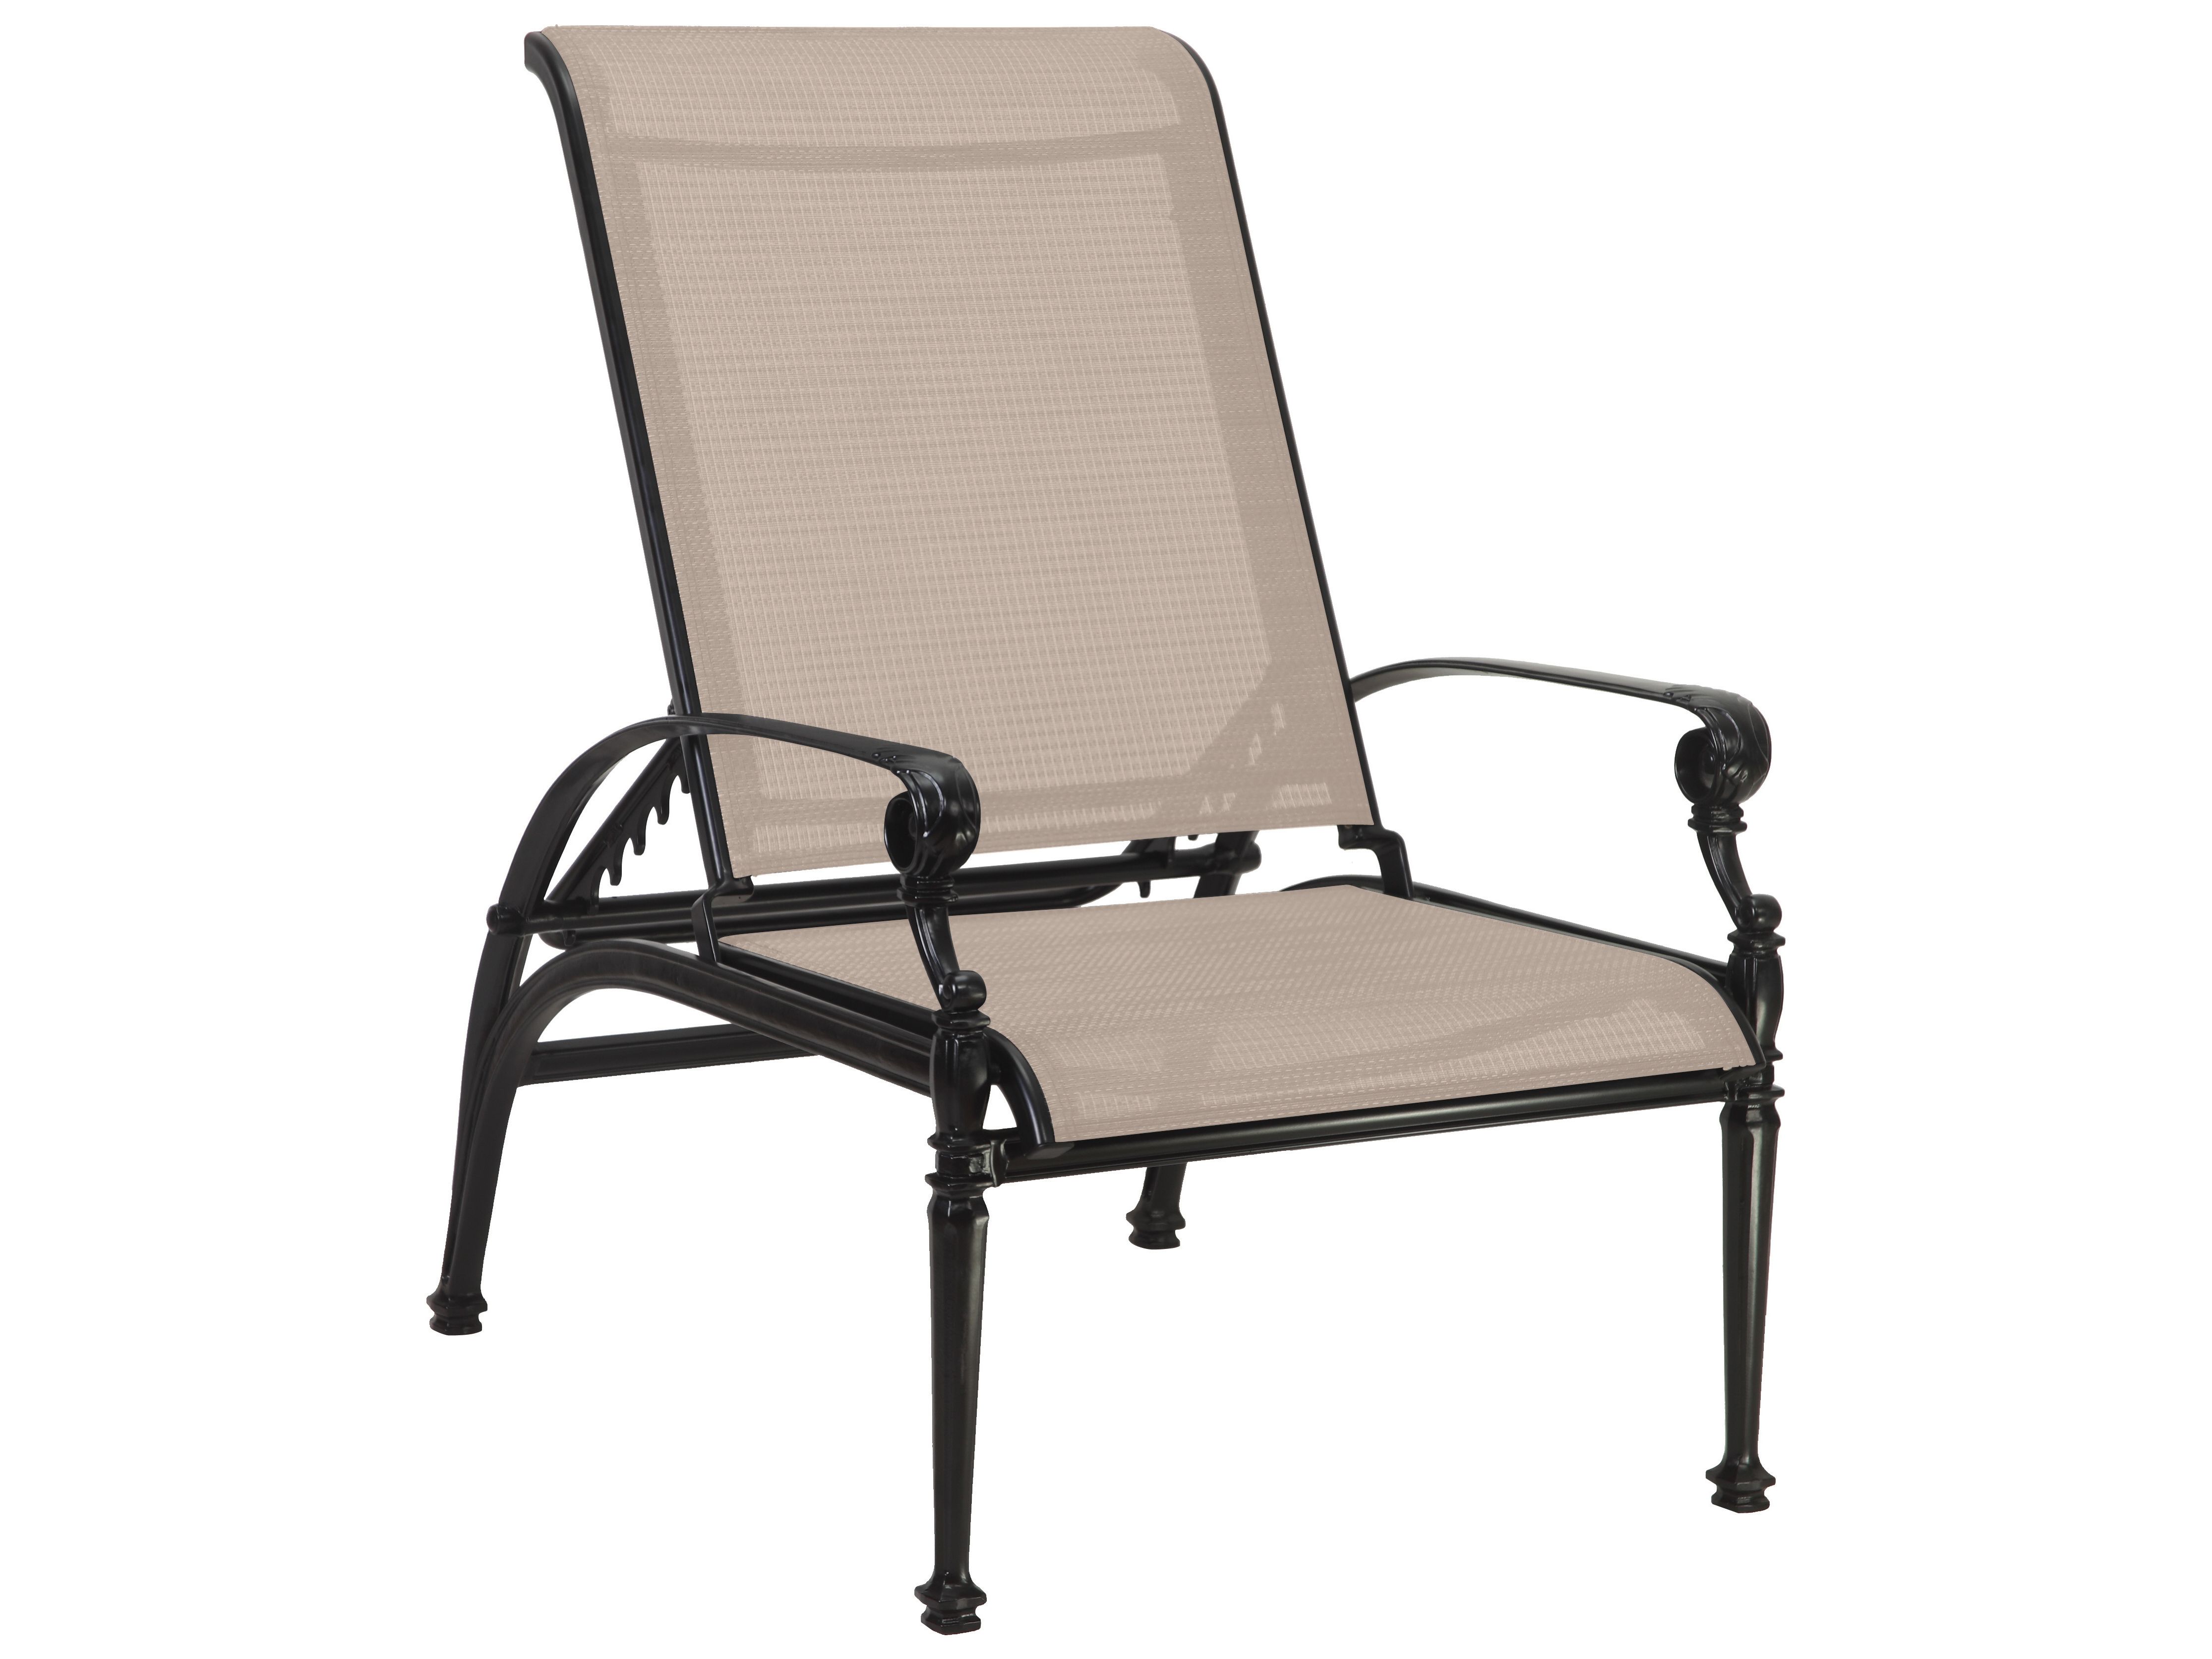 Reclining Sling Lounge Chairs For Preferred Gensun Grand Terrace Sling Cast Aluminum Reclining Chair (View 22 of 25)